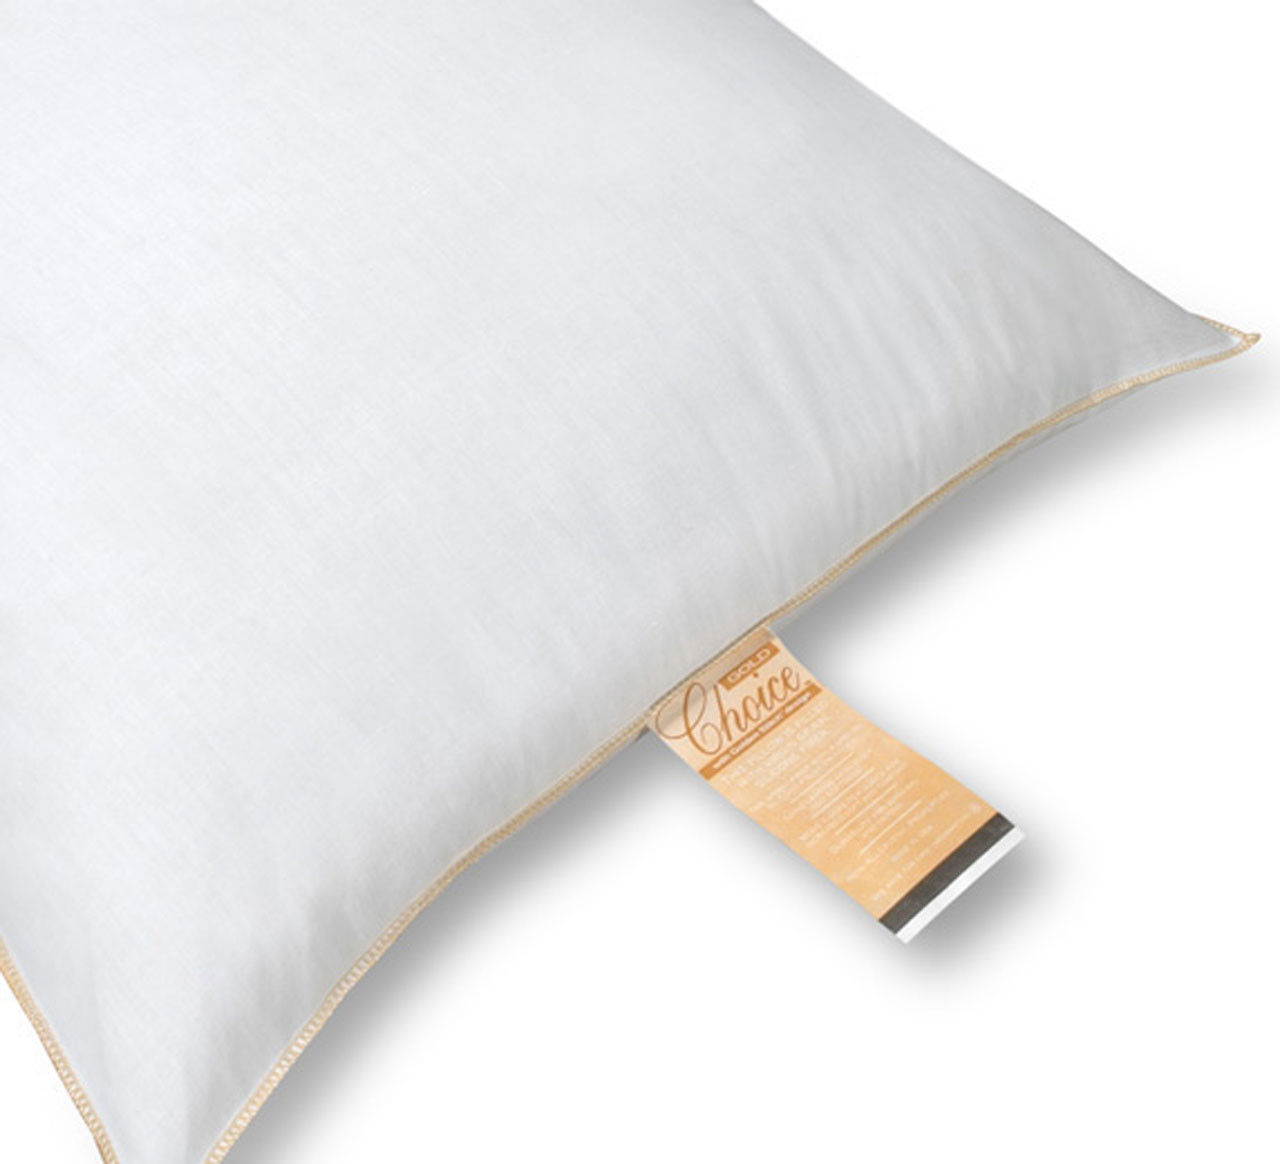 In terms of dimensions, what are the available sizes for Super Gold Choice Pillows?